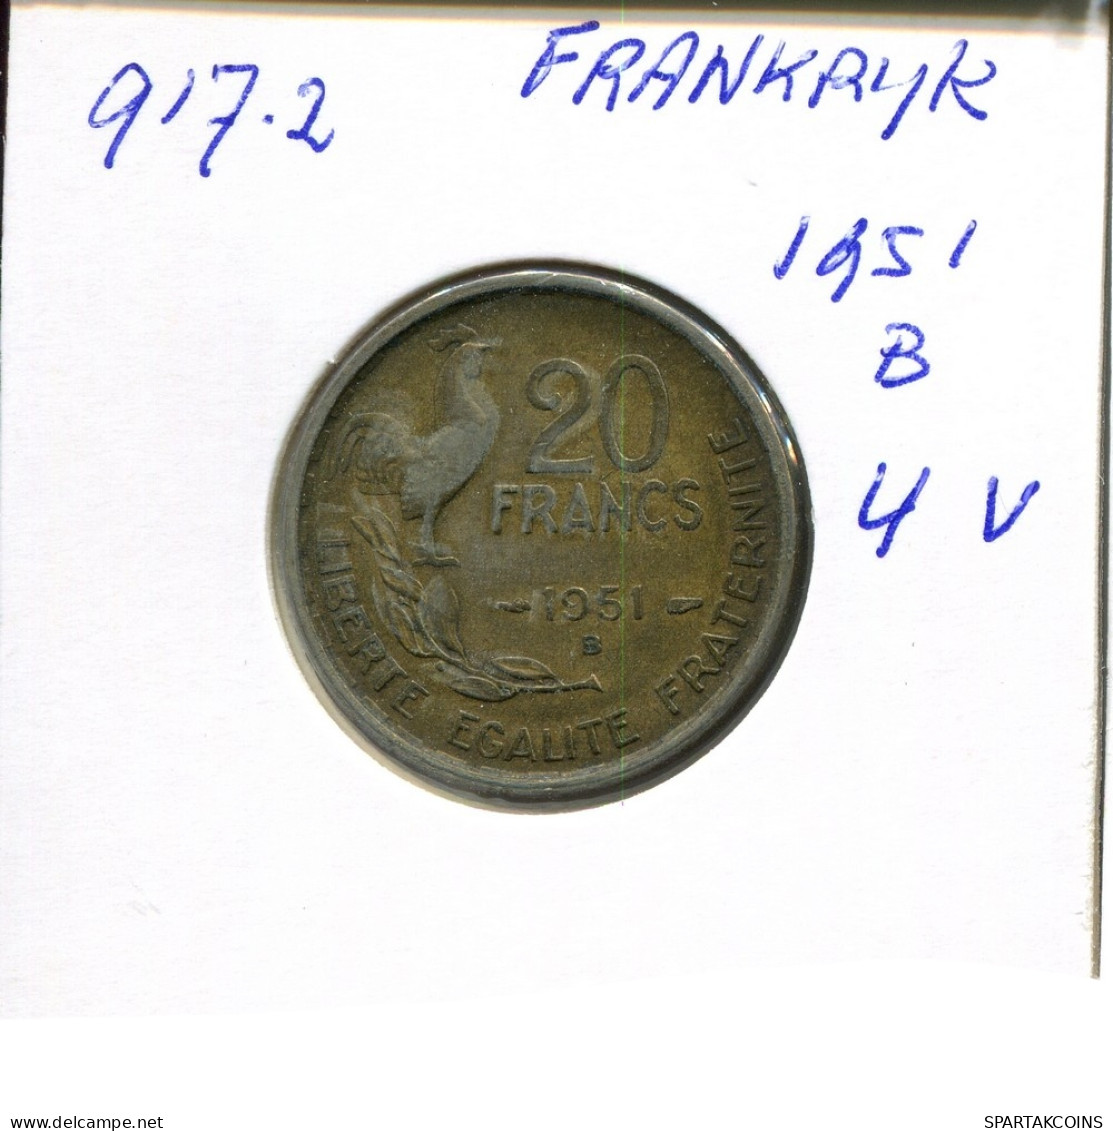 20 FRANCS 1951 B FRANCE French Coin #AN464 - 20 Francs